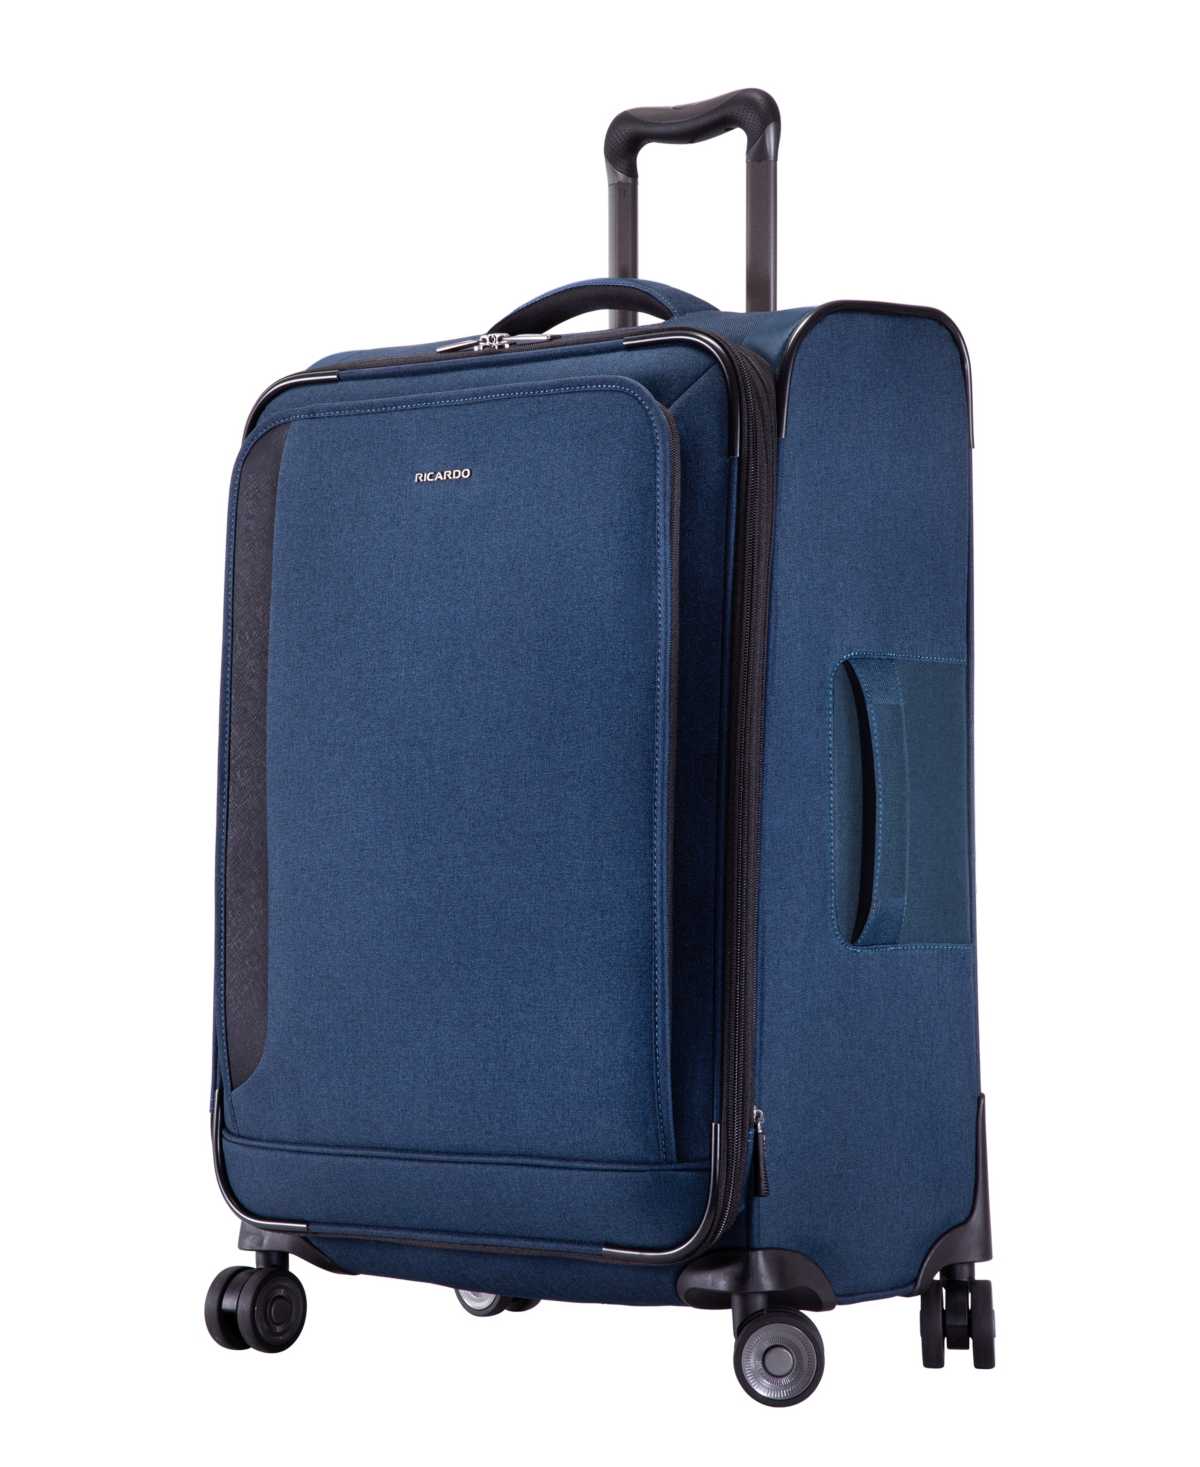 Malibu Bay 3.0 Check-In Suitcase - Astral Blue